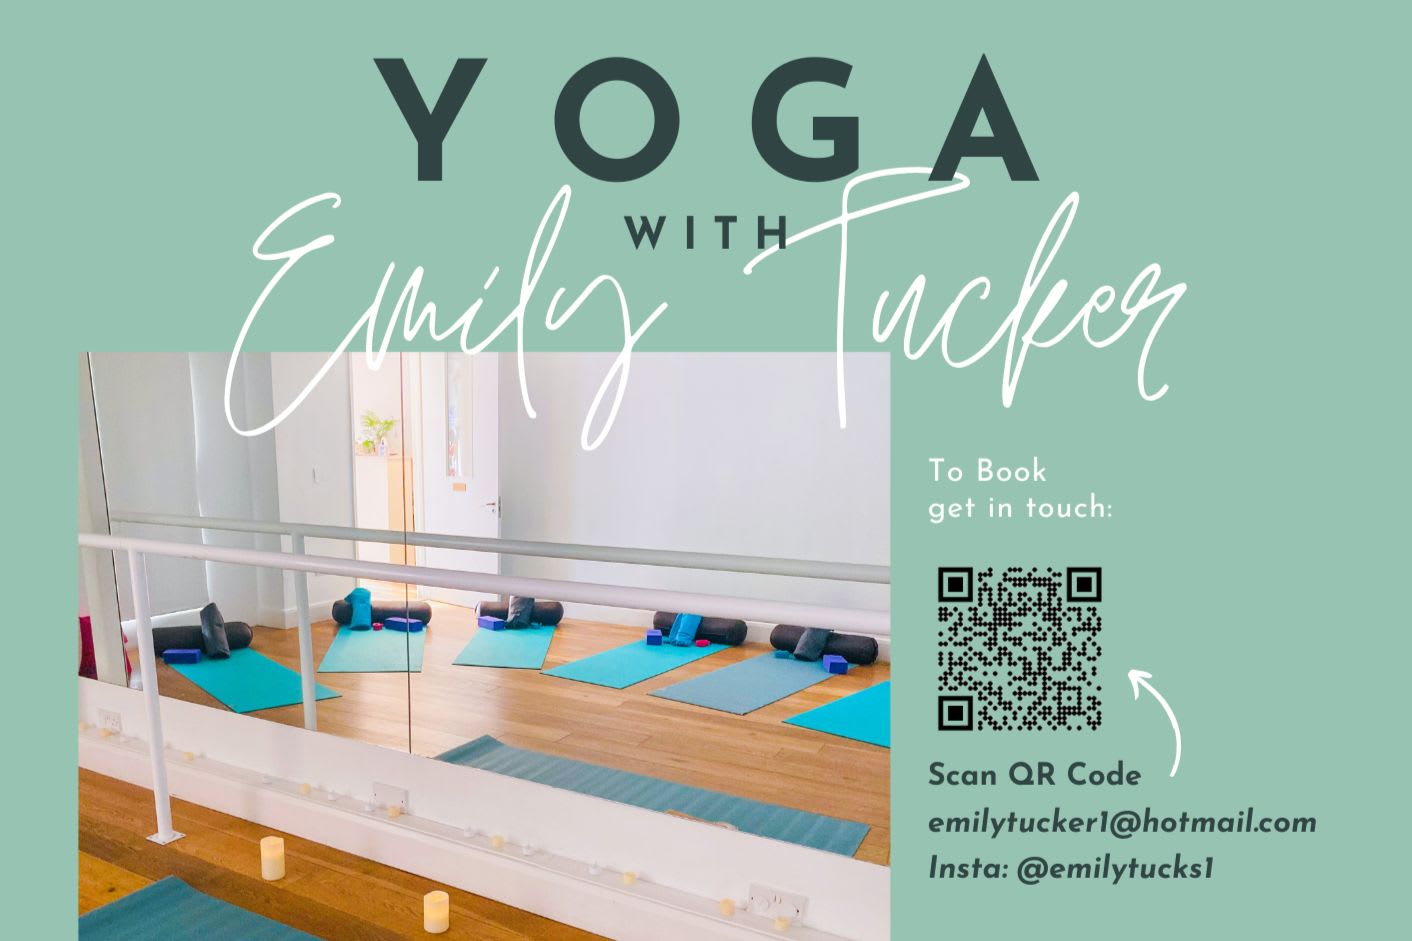 The Yoga Studio - Ladies Only: Read Reviews and Book Classes on ClassPass